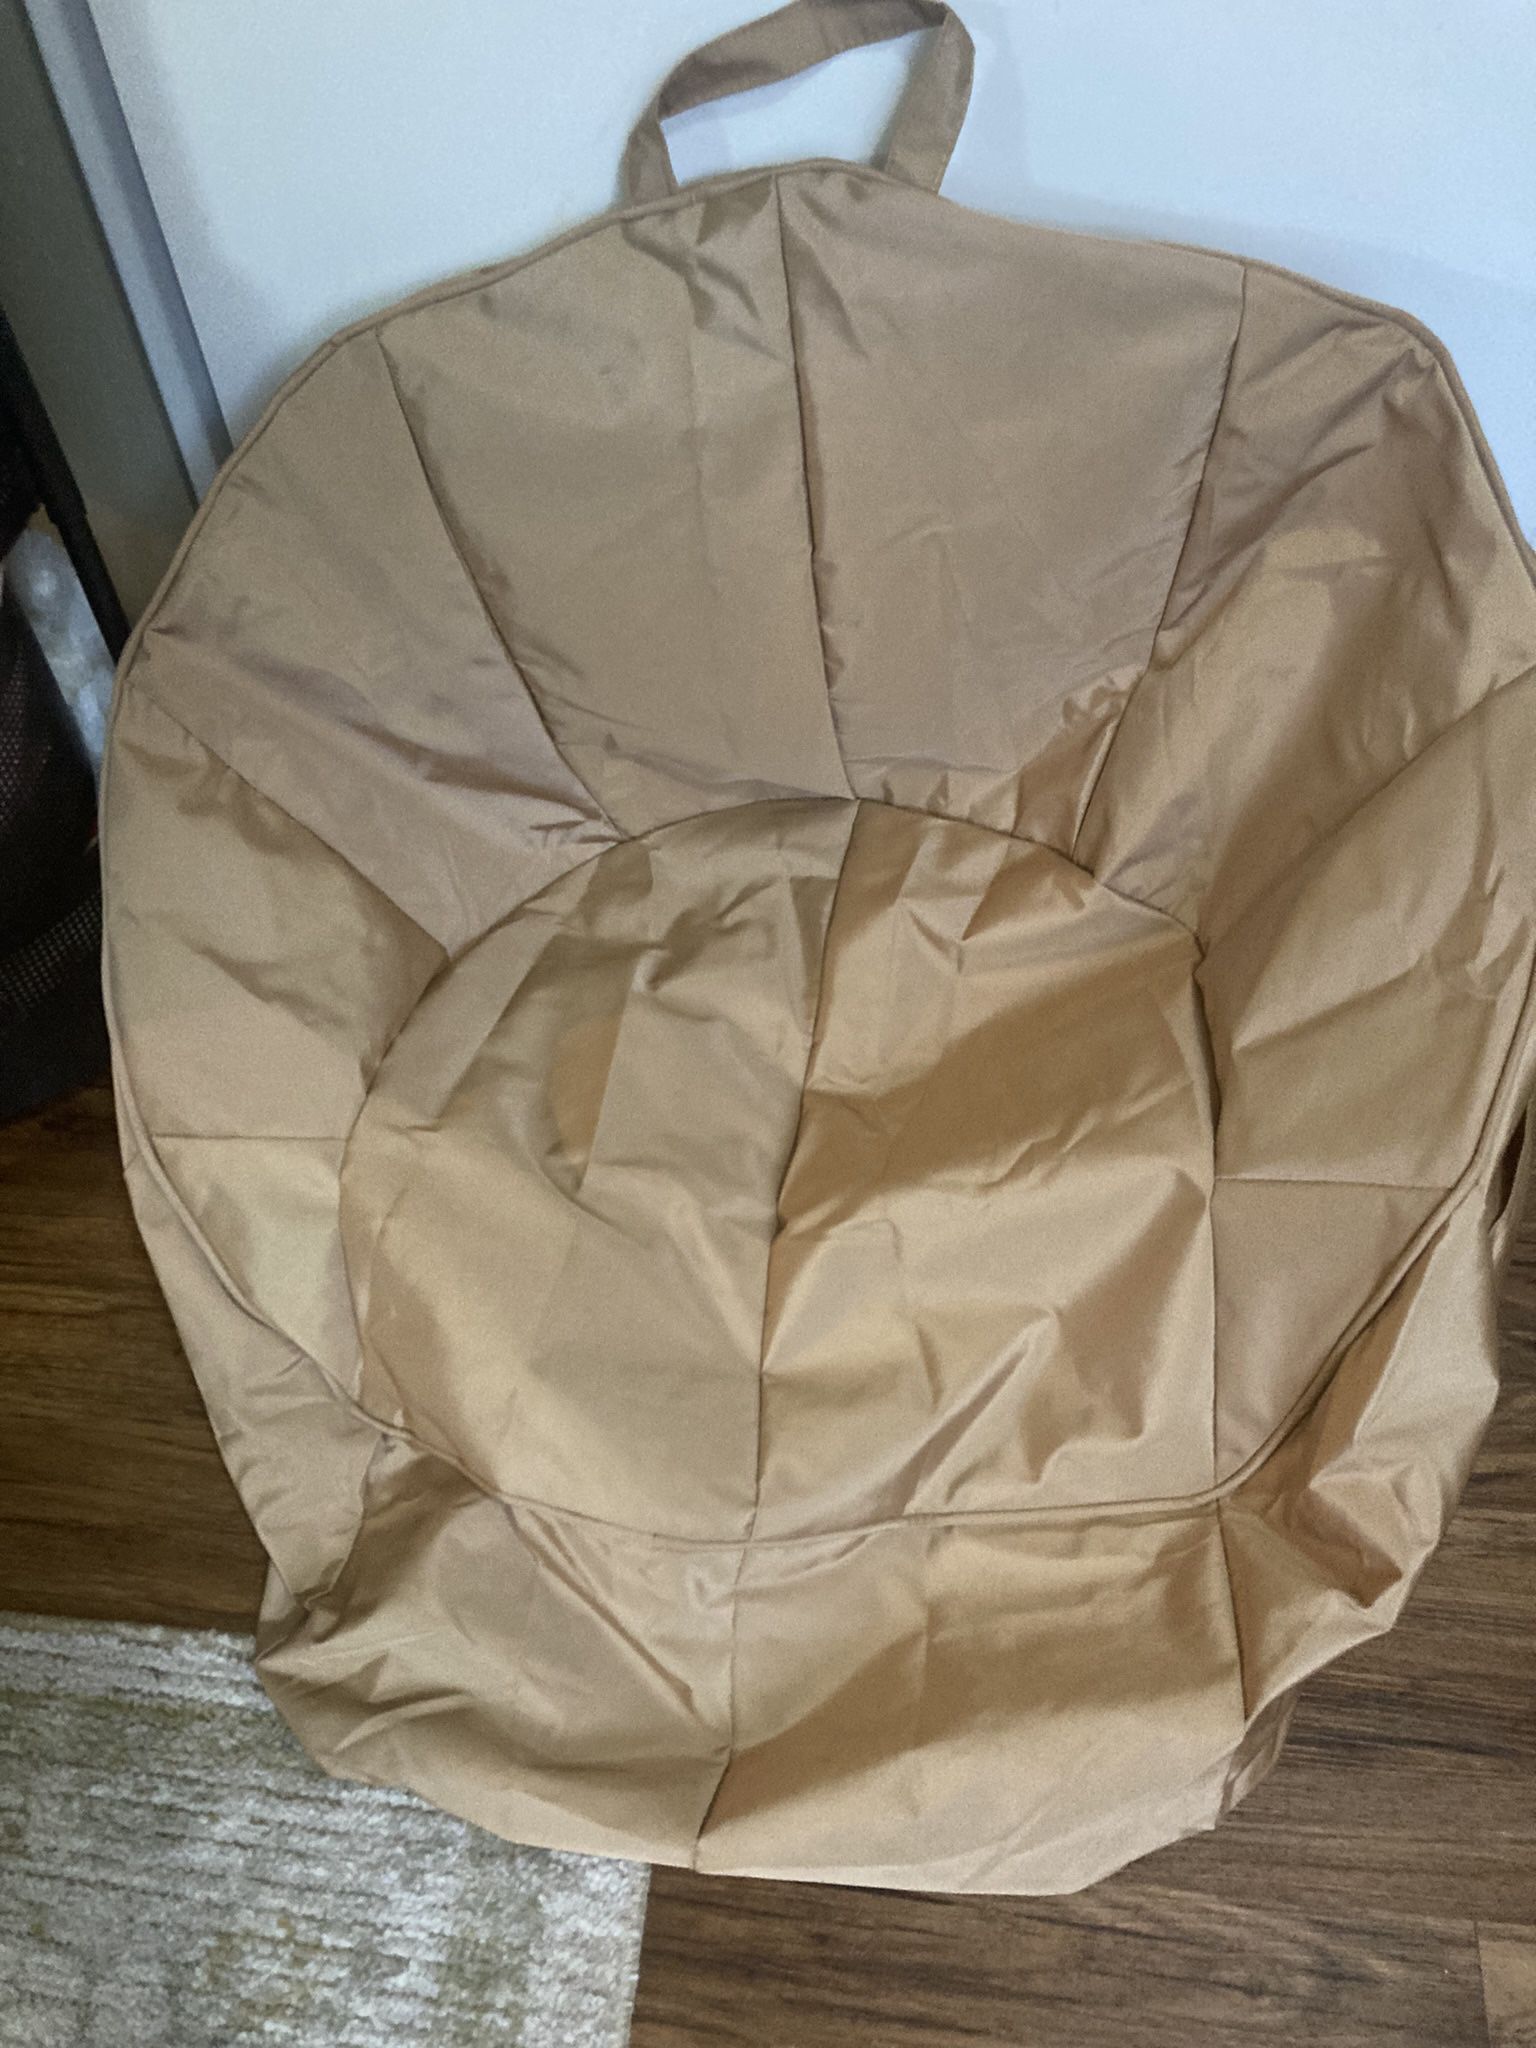 Water Proof All Season Beanless Bag Very Durable Available In Blue And Tan Color